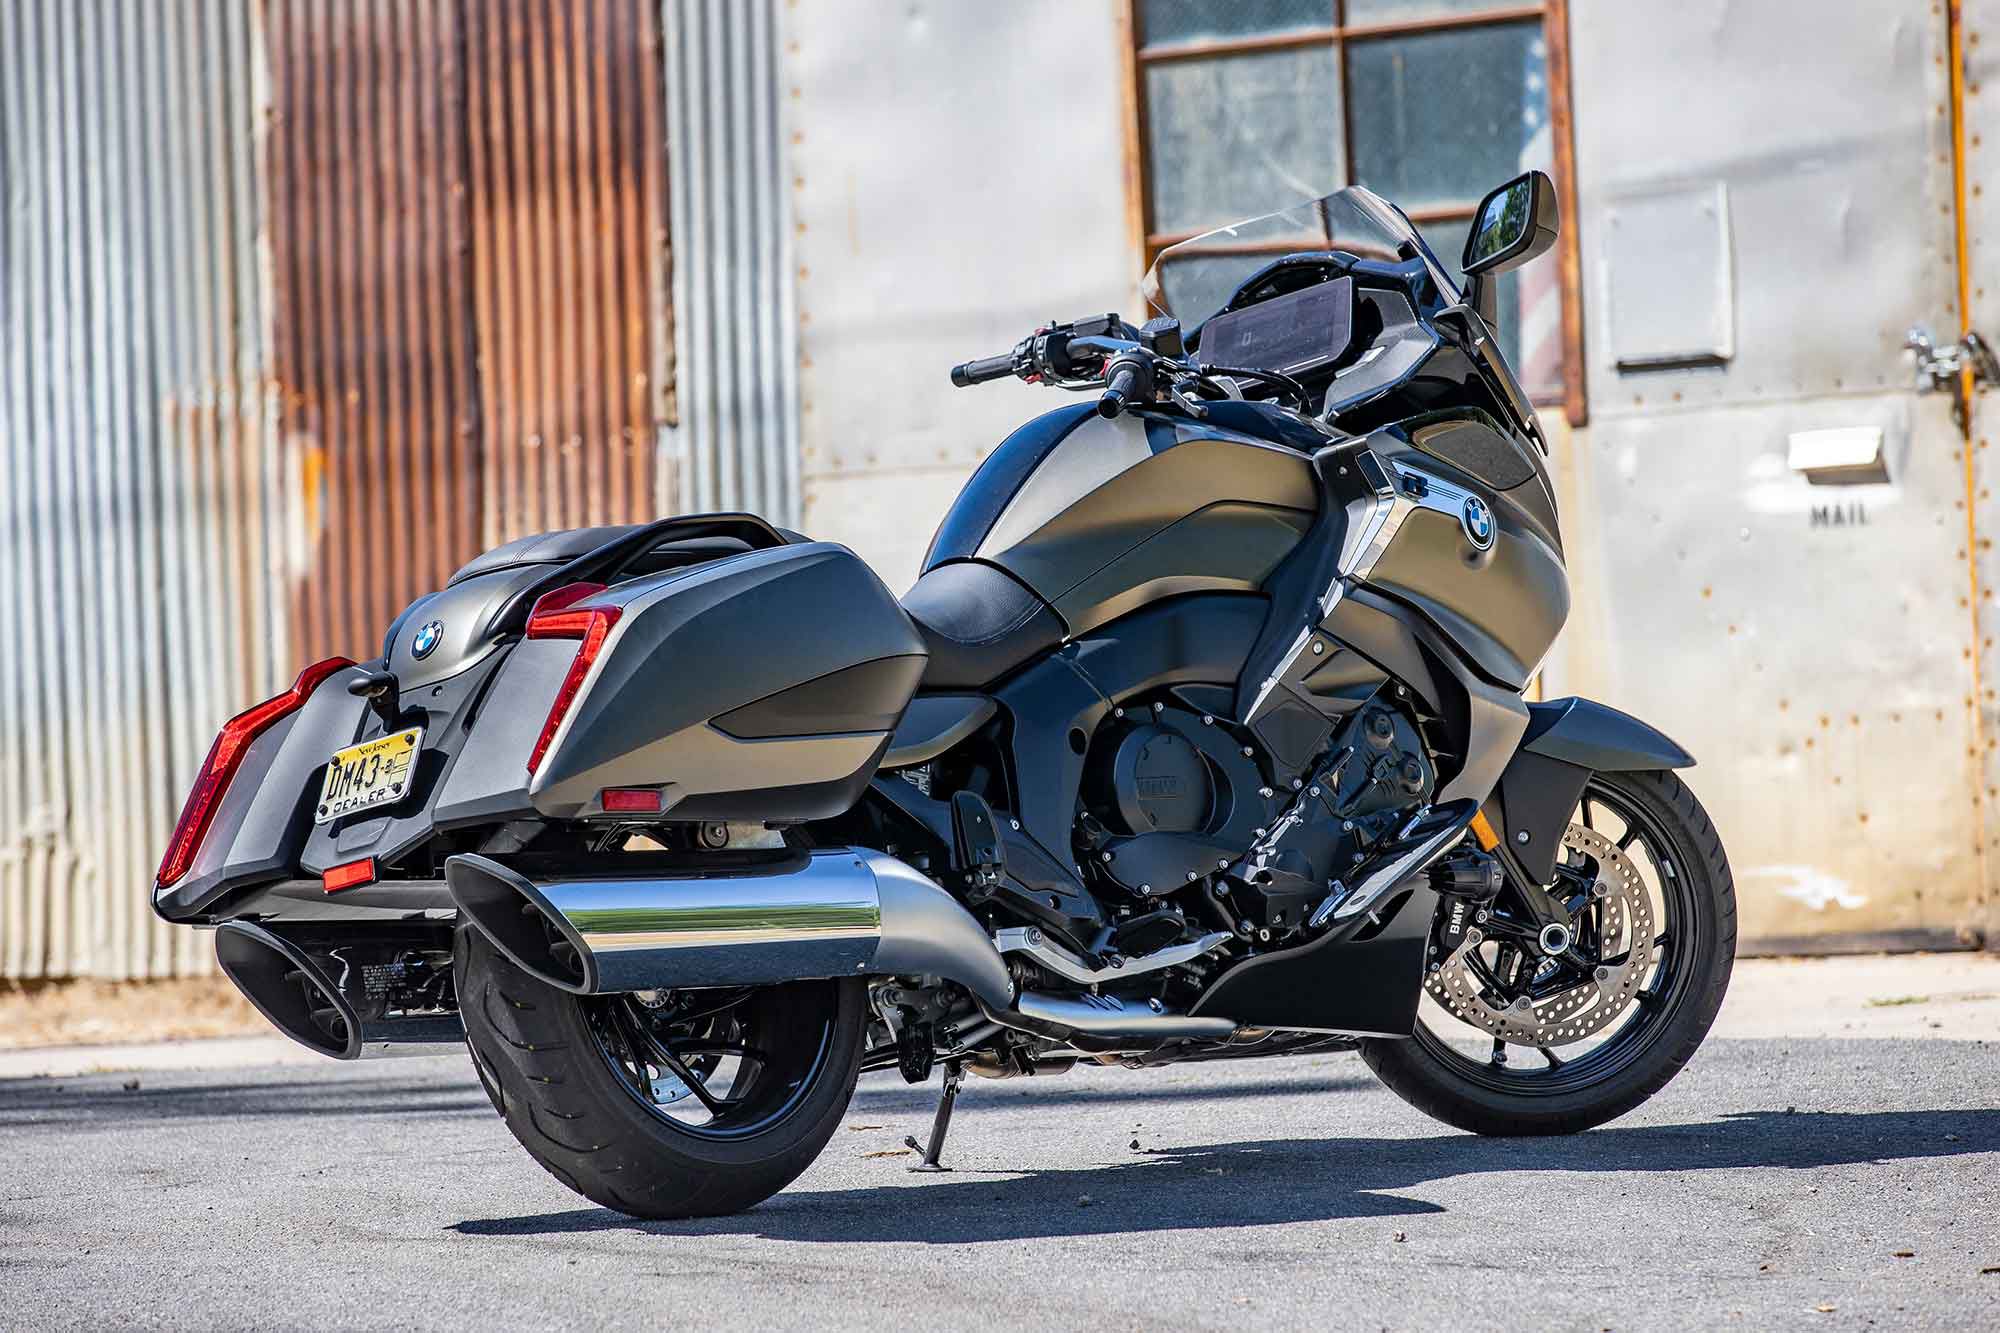 The K 1600 B is especially attractive when viewed from the rear three-quarter angle. We love its giant swept pipes that emit a pleasing exhaust note from the 1,649cc inline-six.